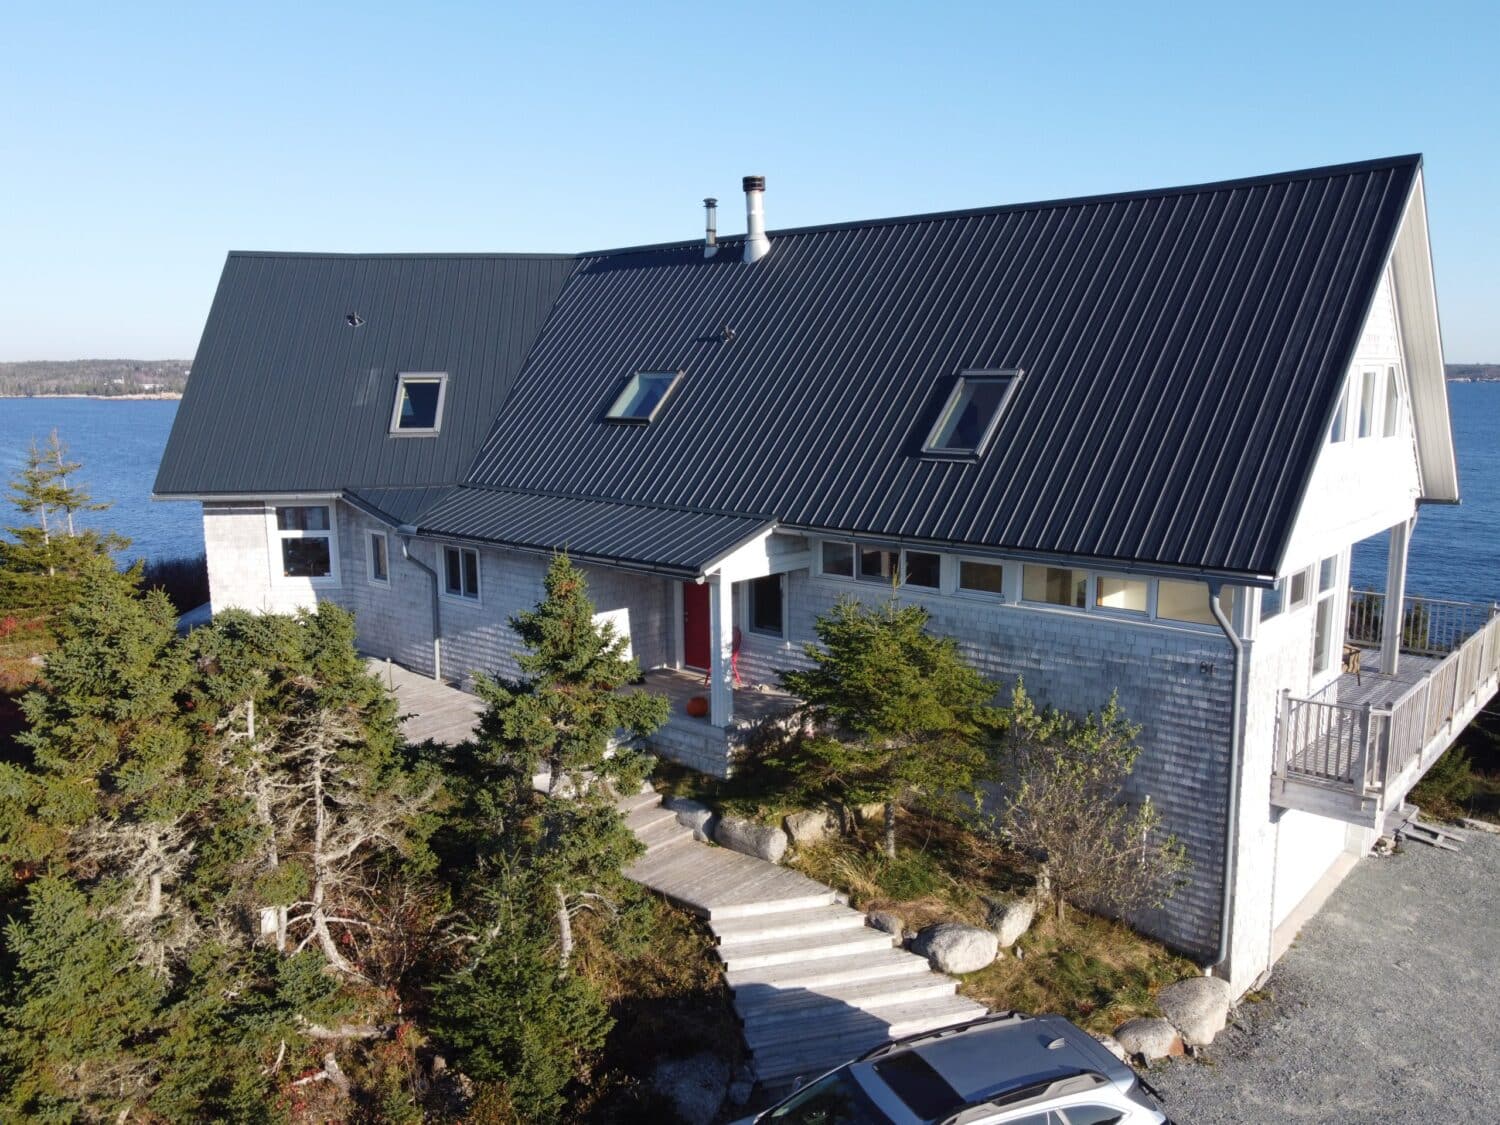 Residental home in halifax with metal roofing installed by Ruggles Contracting.